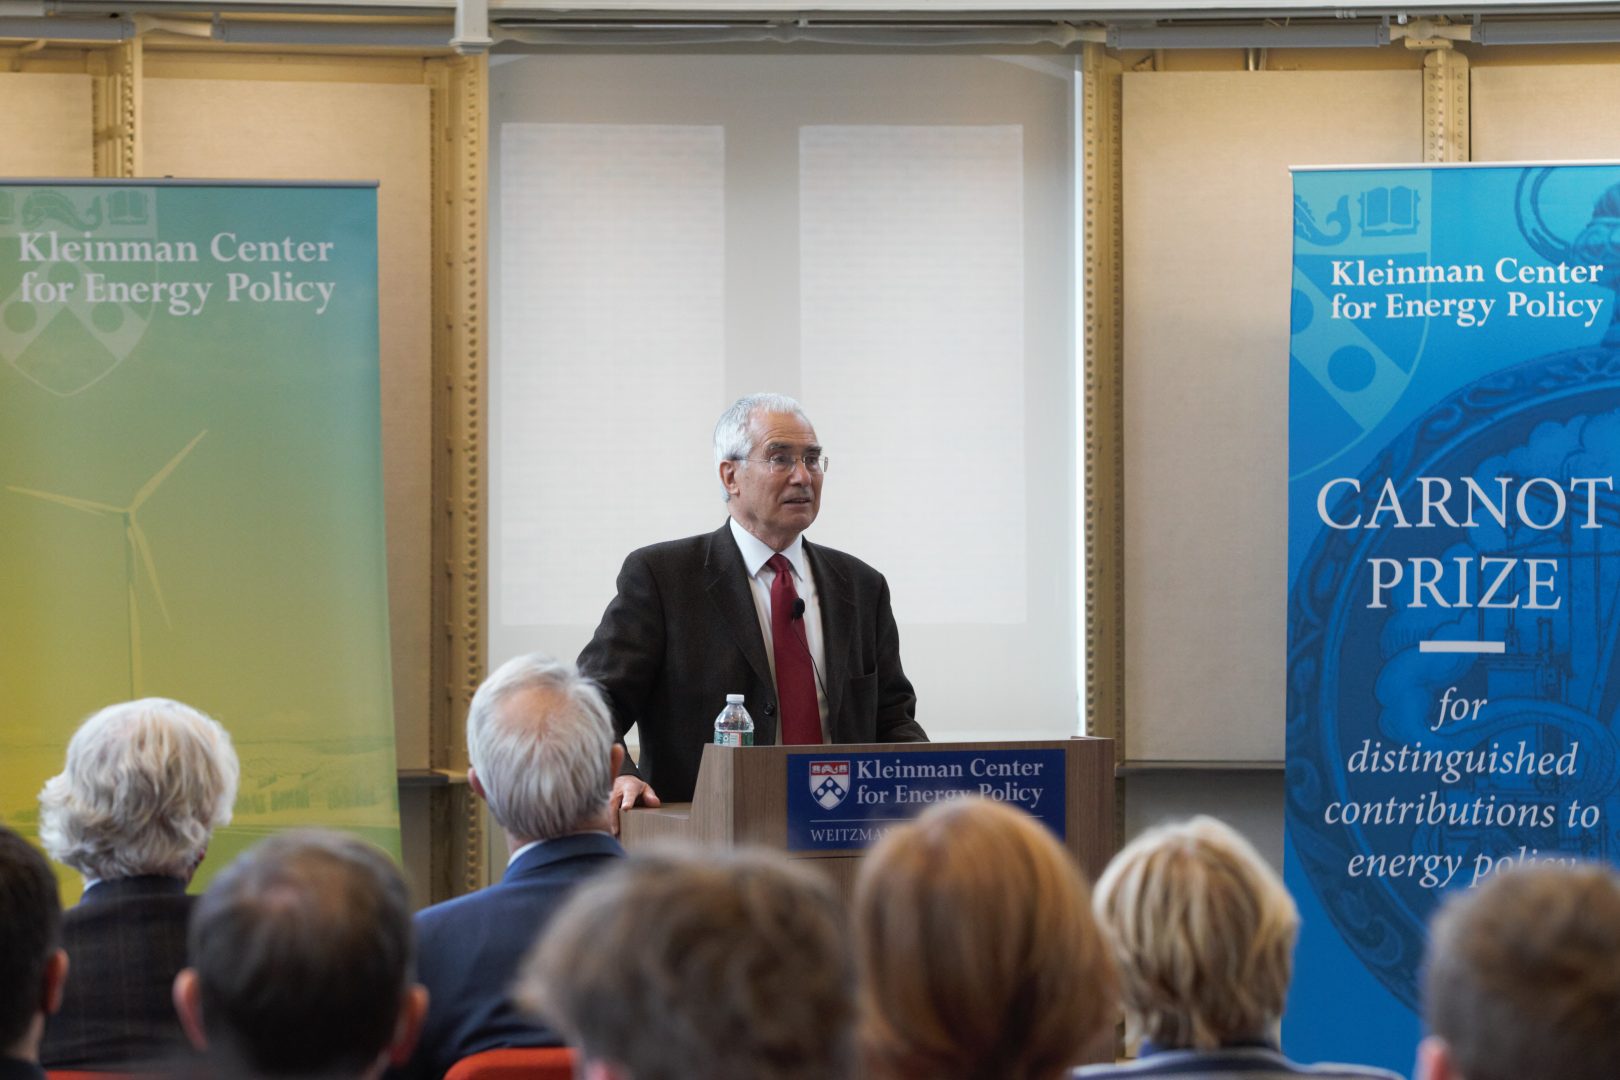 Lord Nicholas Stern, professor at the London School of Economics and Political Science, speaks after receiving the 2022 Carnot Prize for distinguished contributions to energy policy from the Kleinman Center for Energy Policy at the University of Pennsylvania.